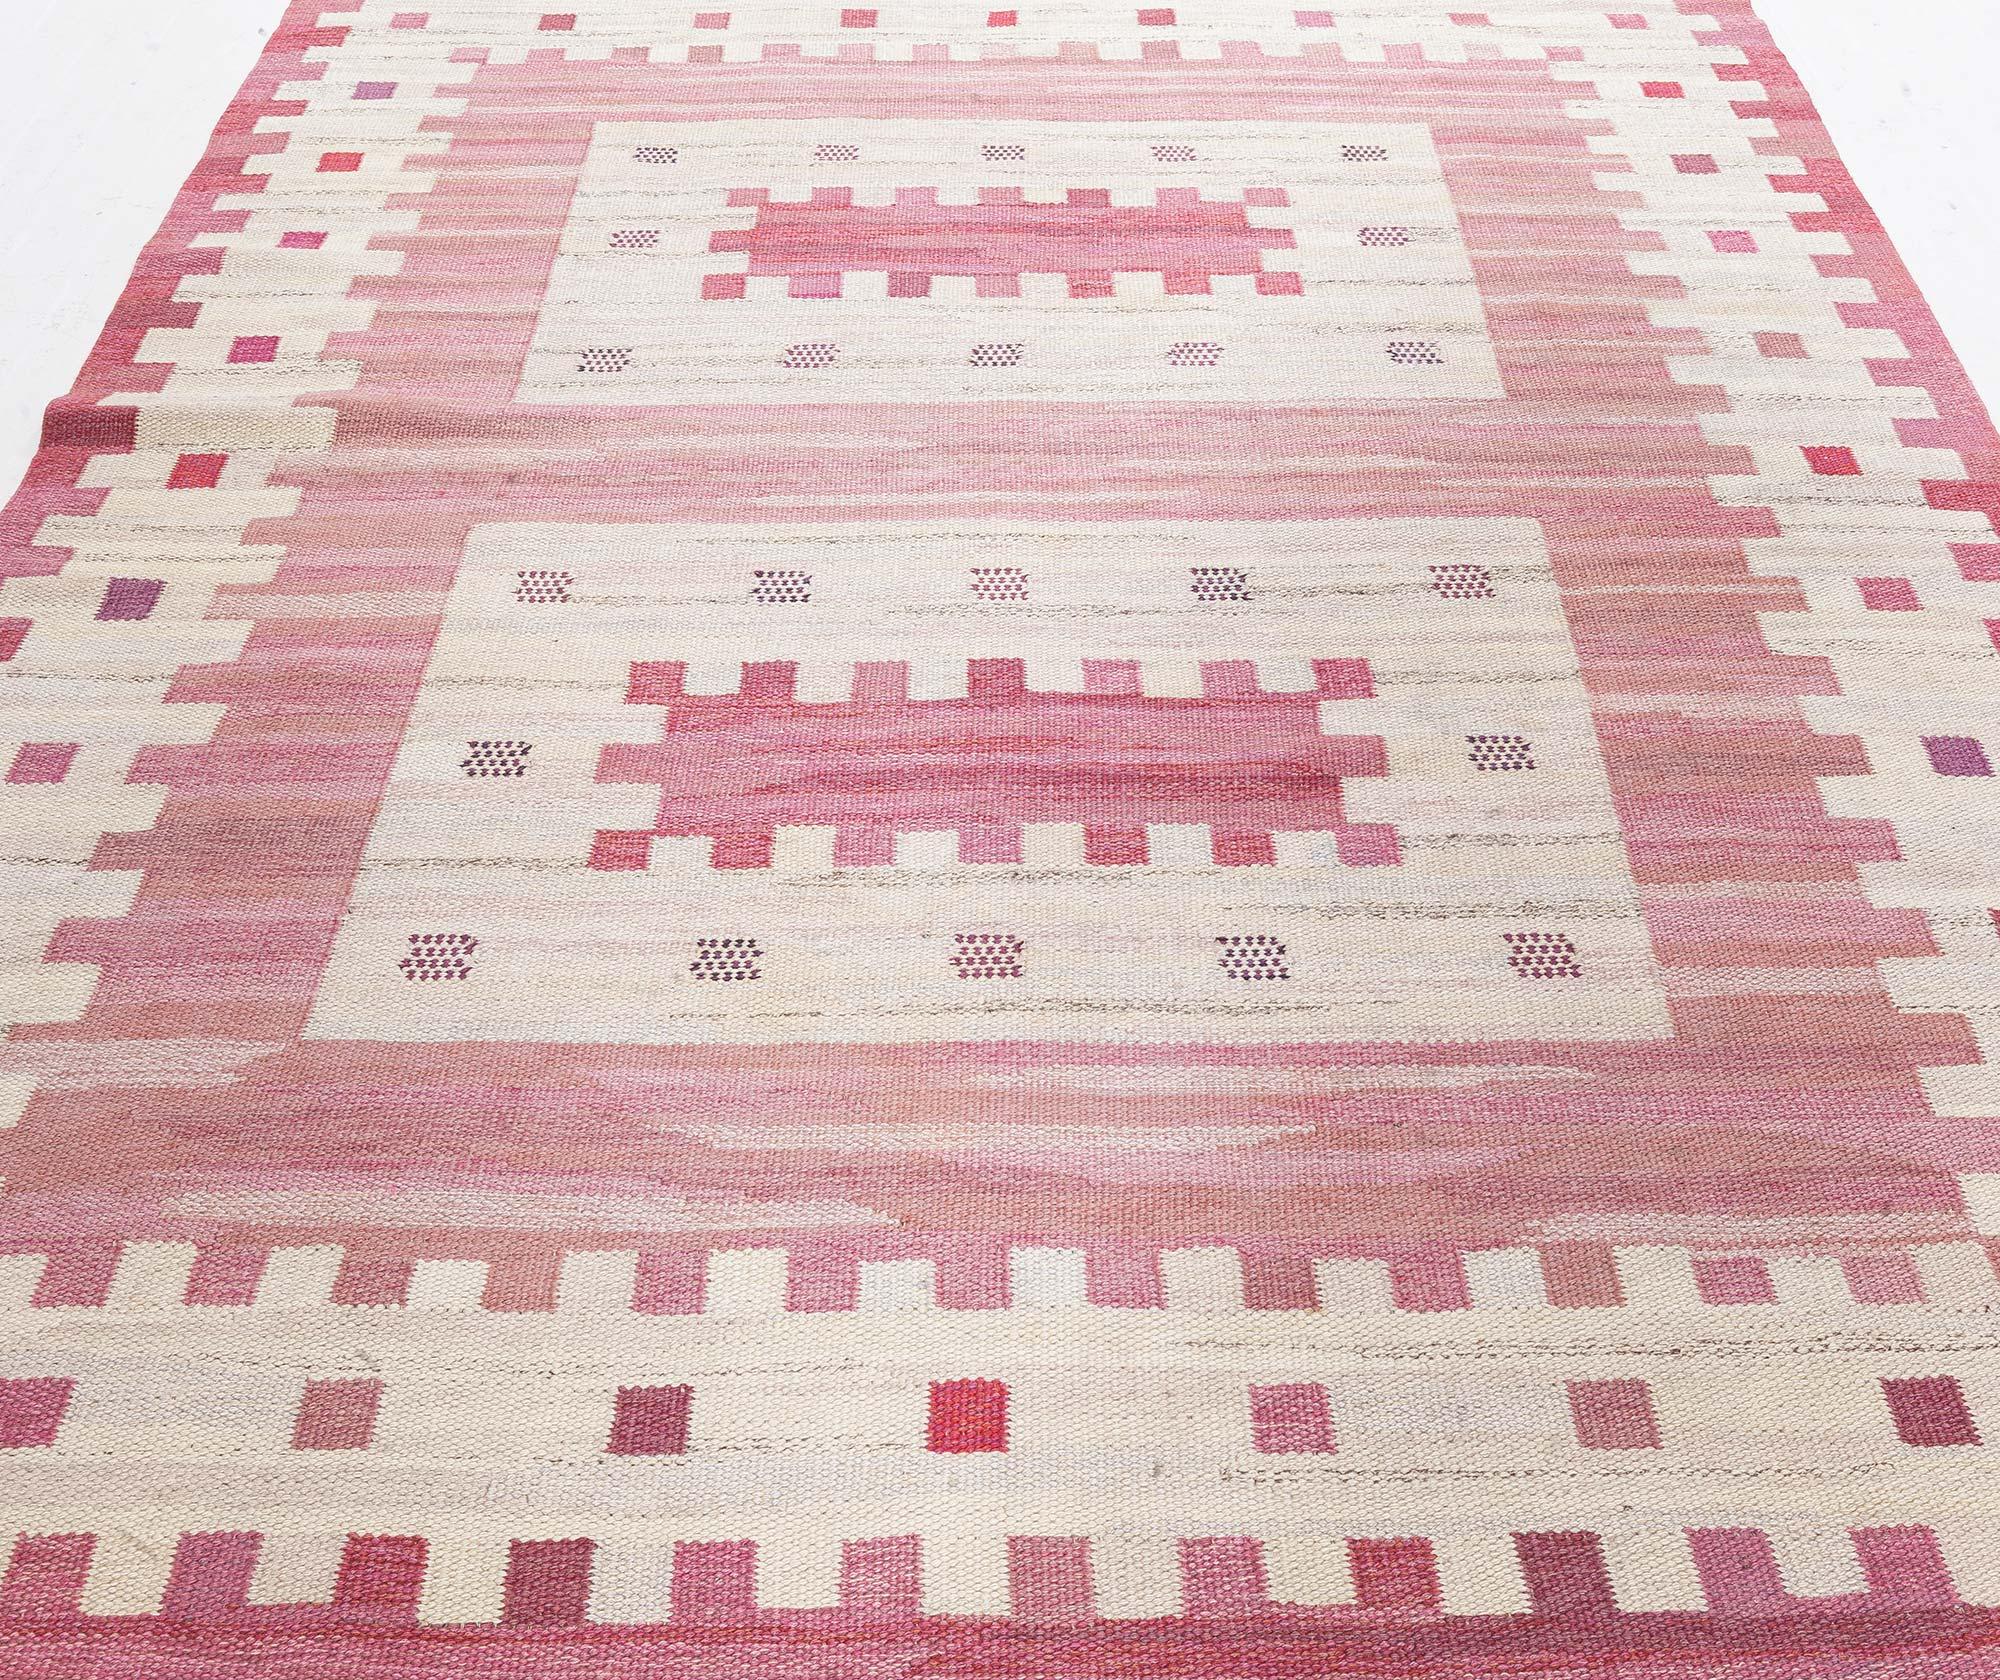 Vintage Swedish Flat Woven by Marianne Richter (Rostaggen) AB MMF
Size: 6'2